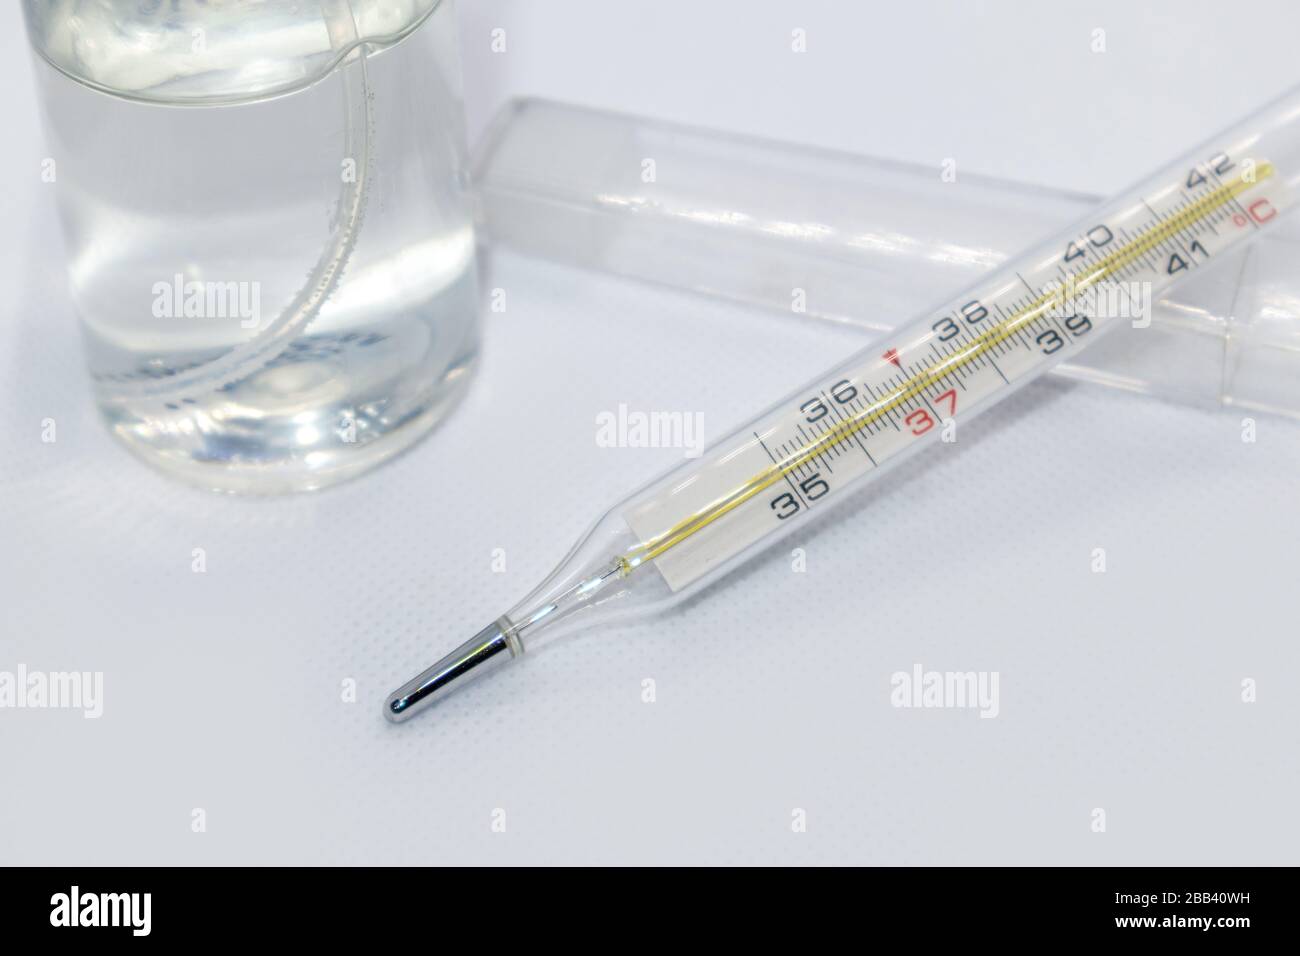 Thermometer macro, mercury instrument, measuring, indicating temperature medical equipment tool on white background Stock Photo